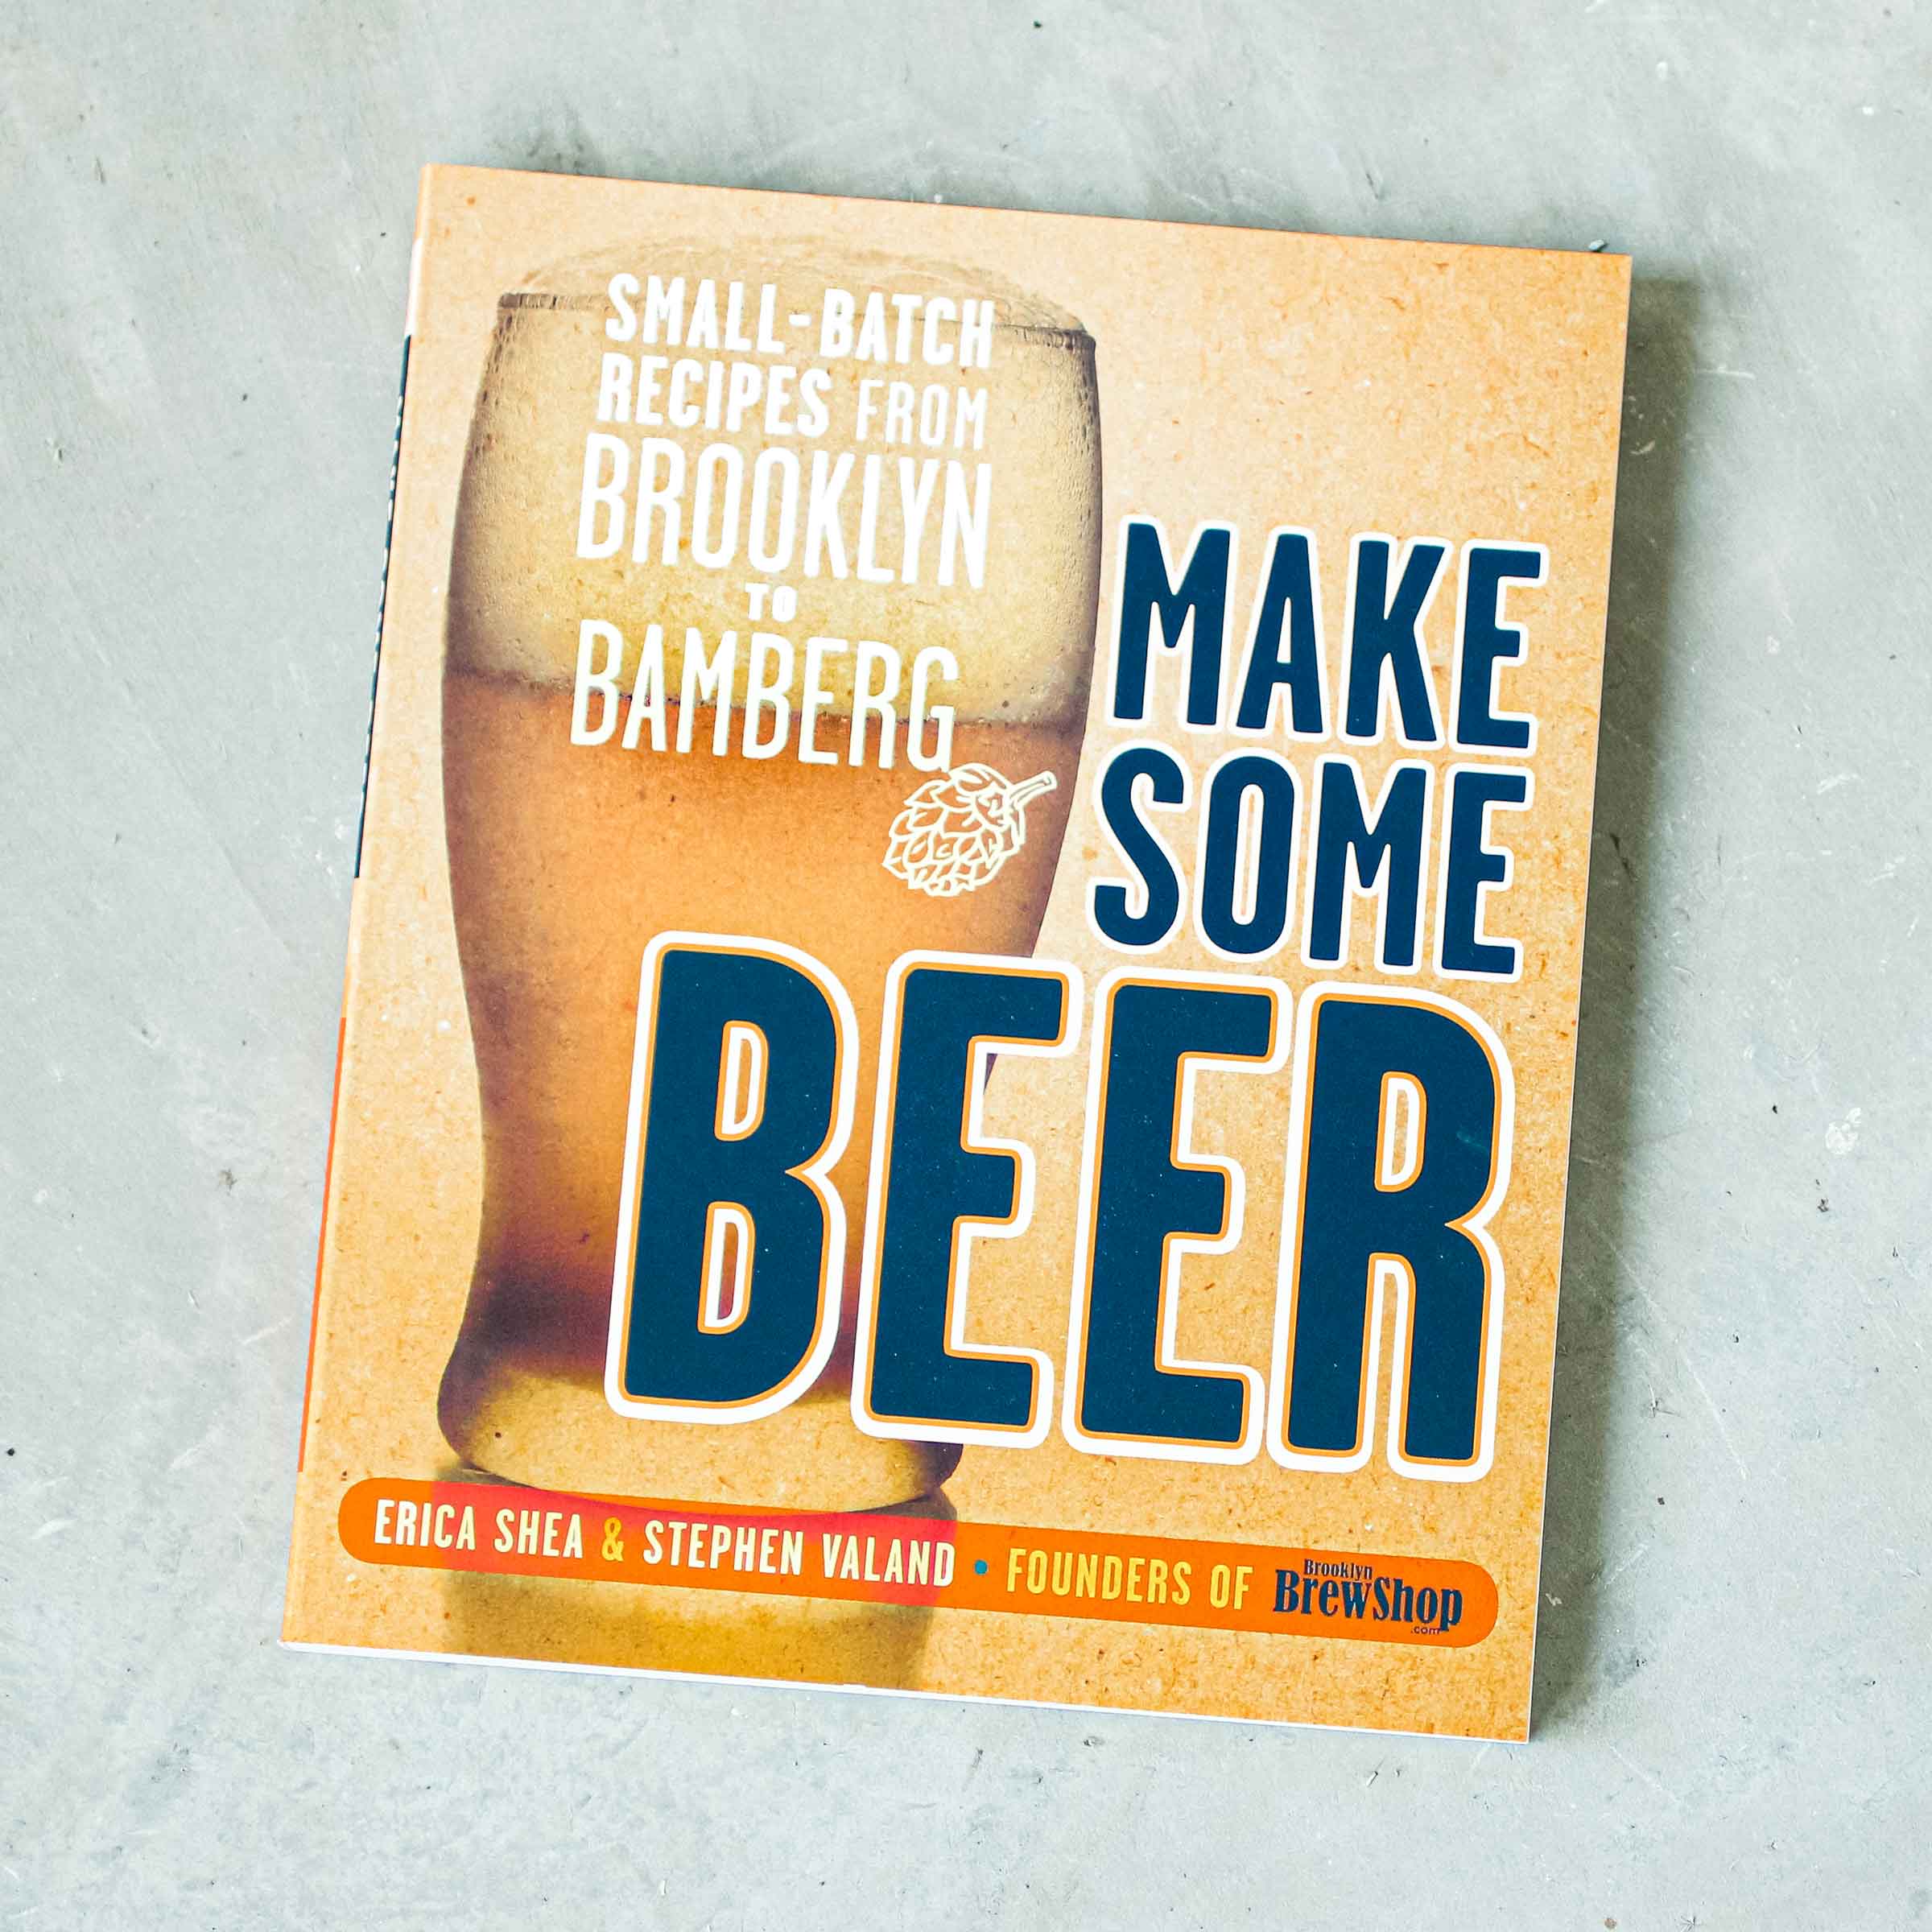 Make Some Beer: Small-Batch Recipes from Brooklyn to Bamberg